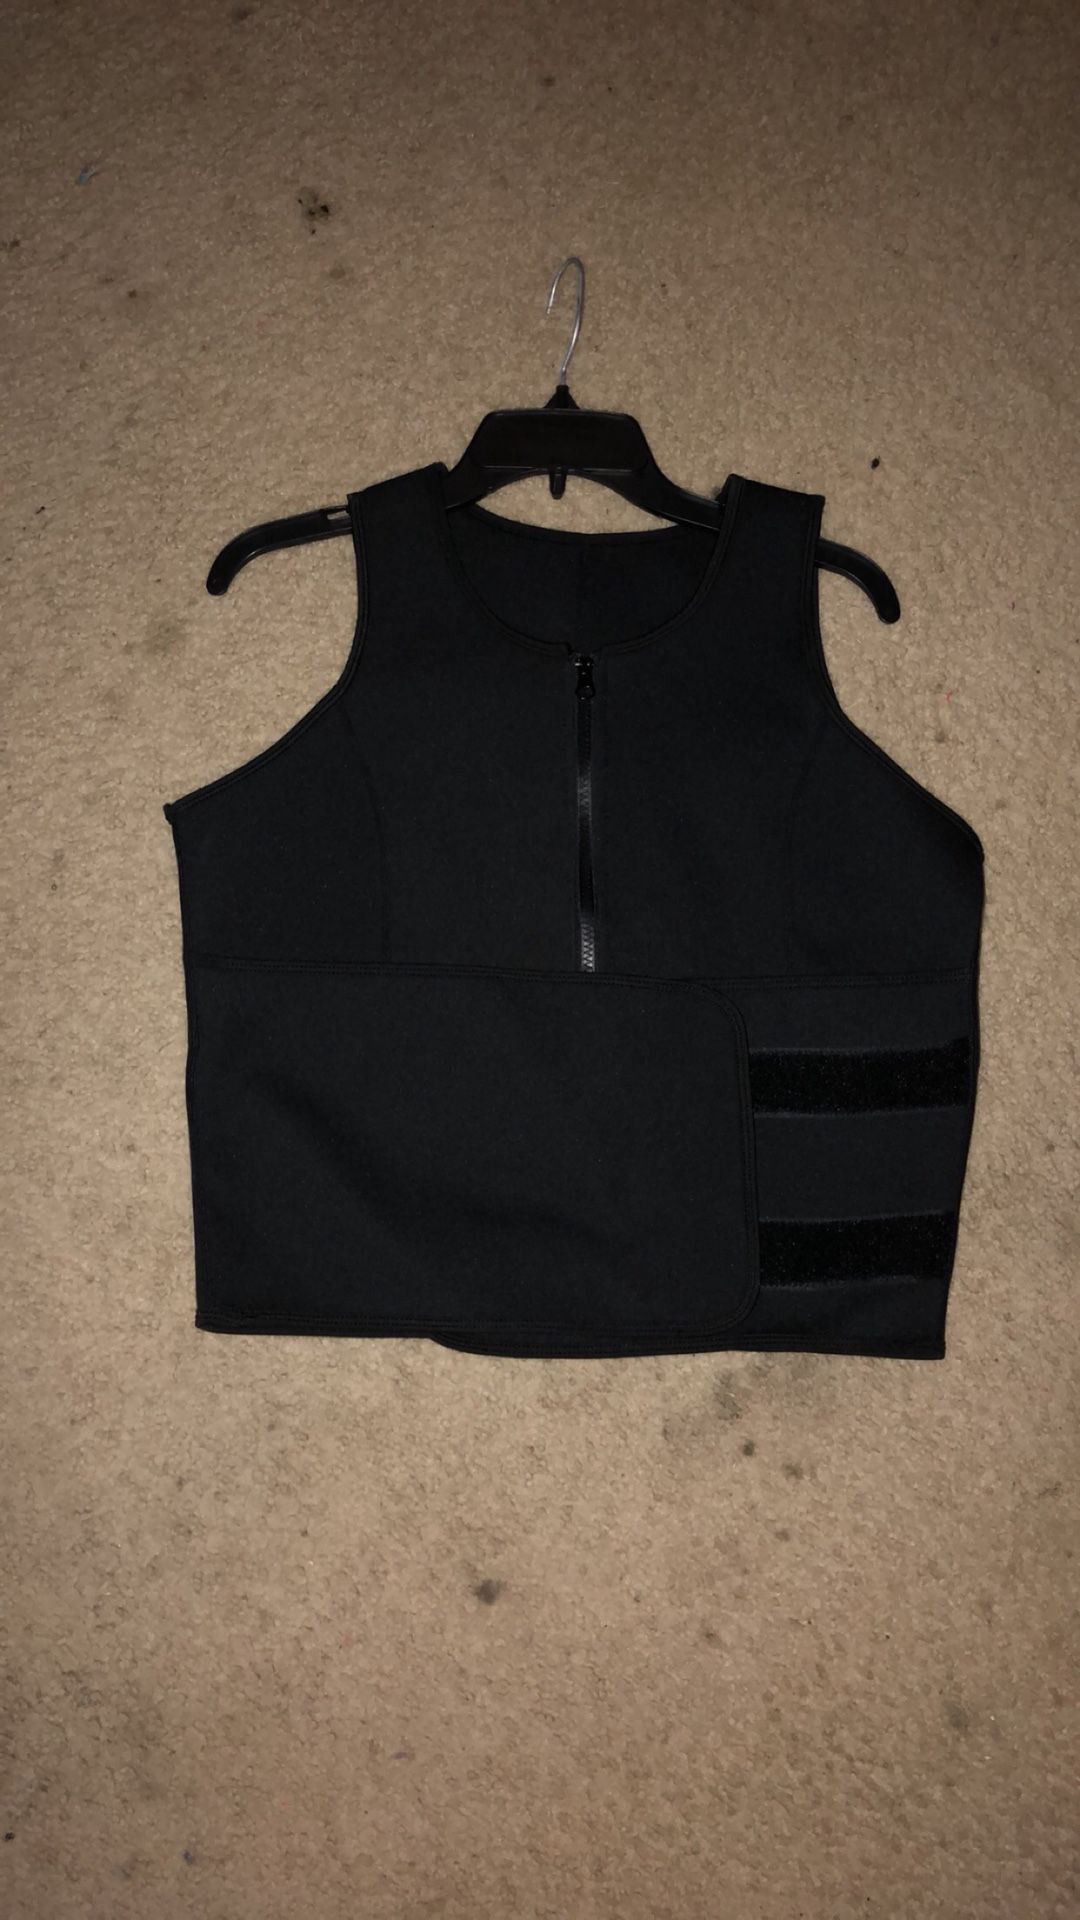 Sweat Vest ! BRAND NEW !! NEVER USED !! Size Large !